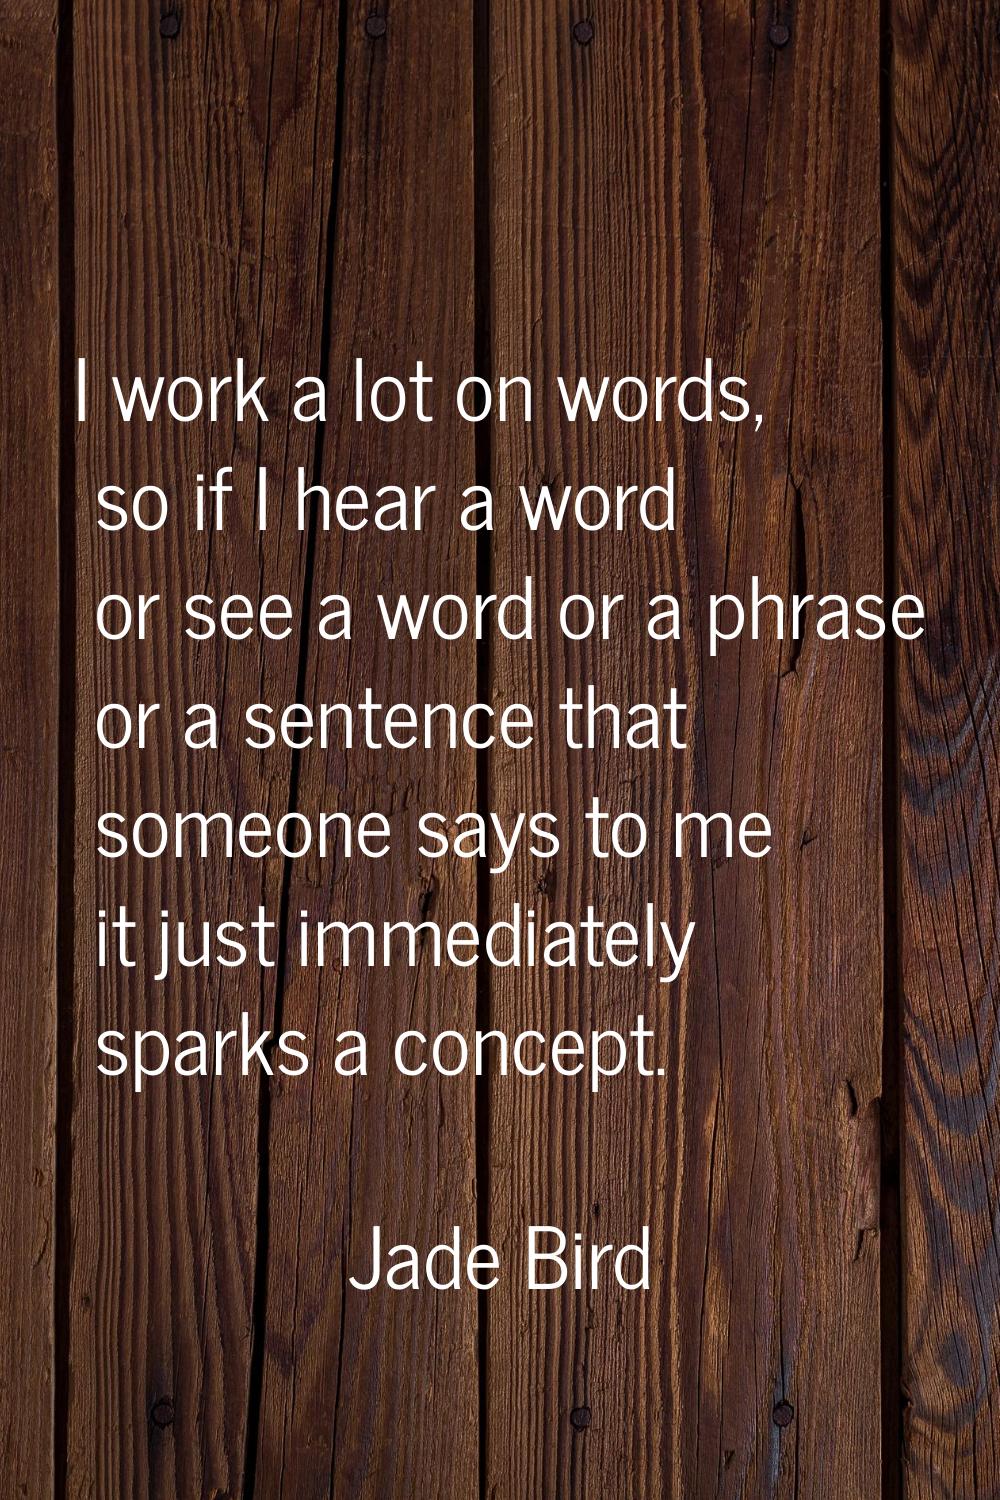 I work a lot on words, so if I hear a word or see a word or a phrase or a sentence that someone say